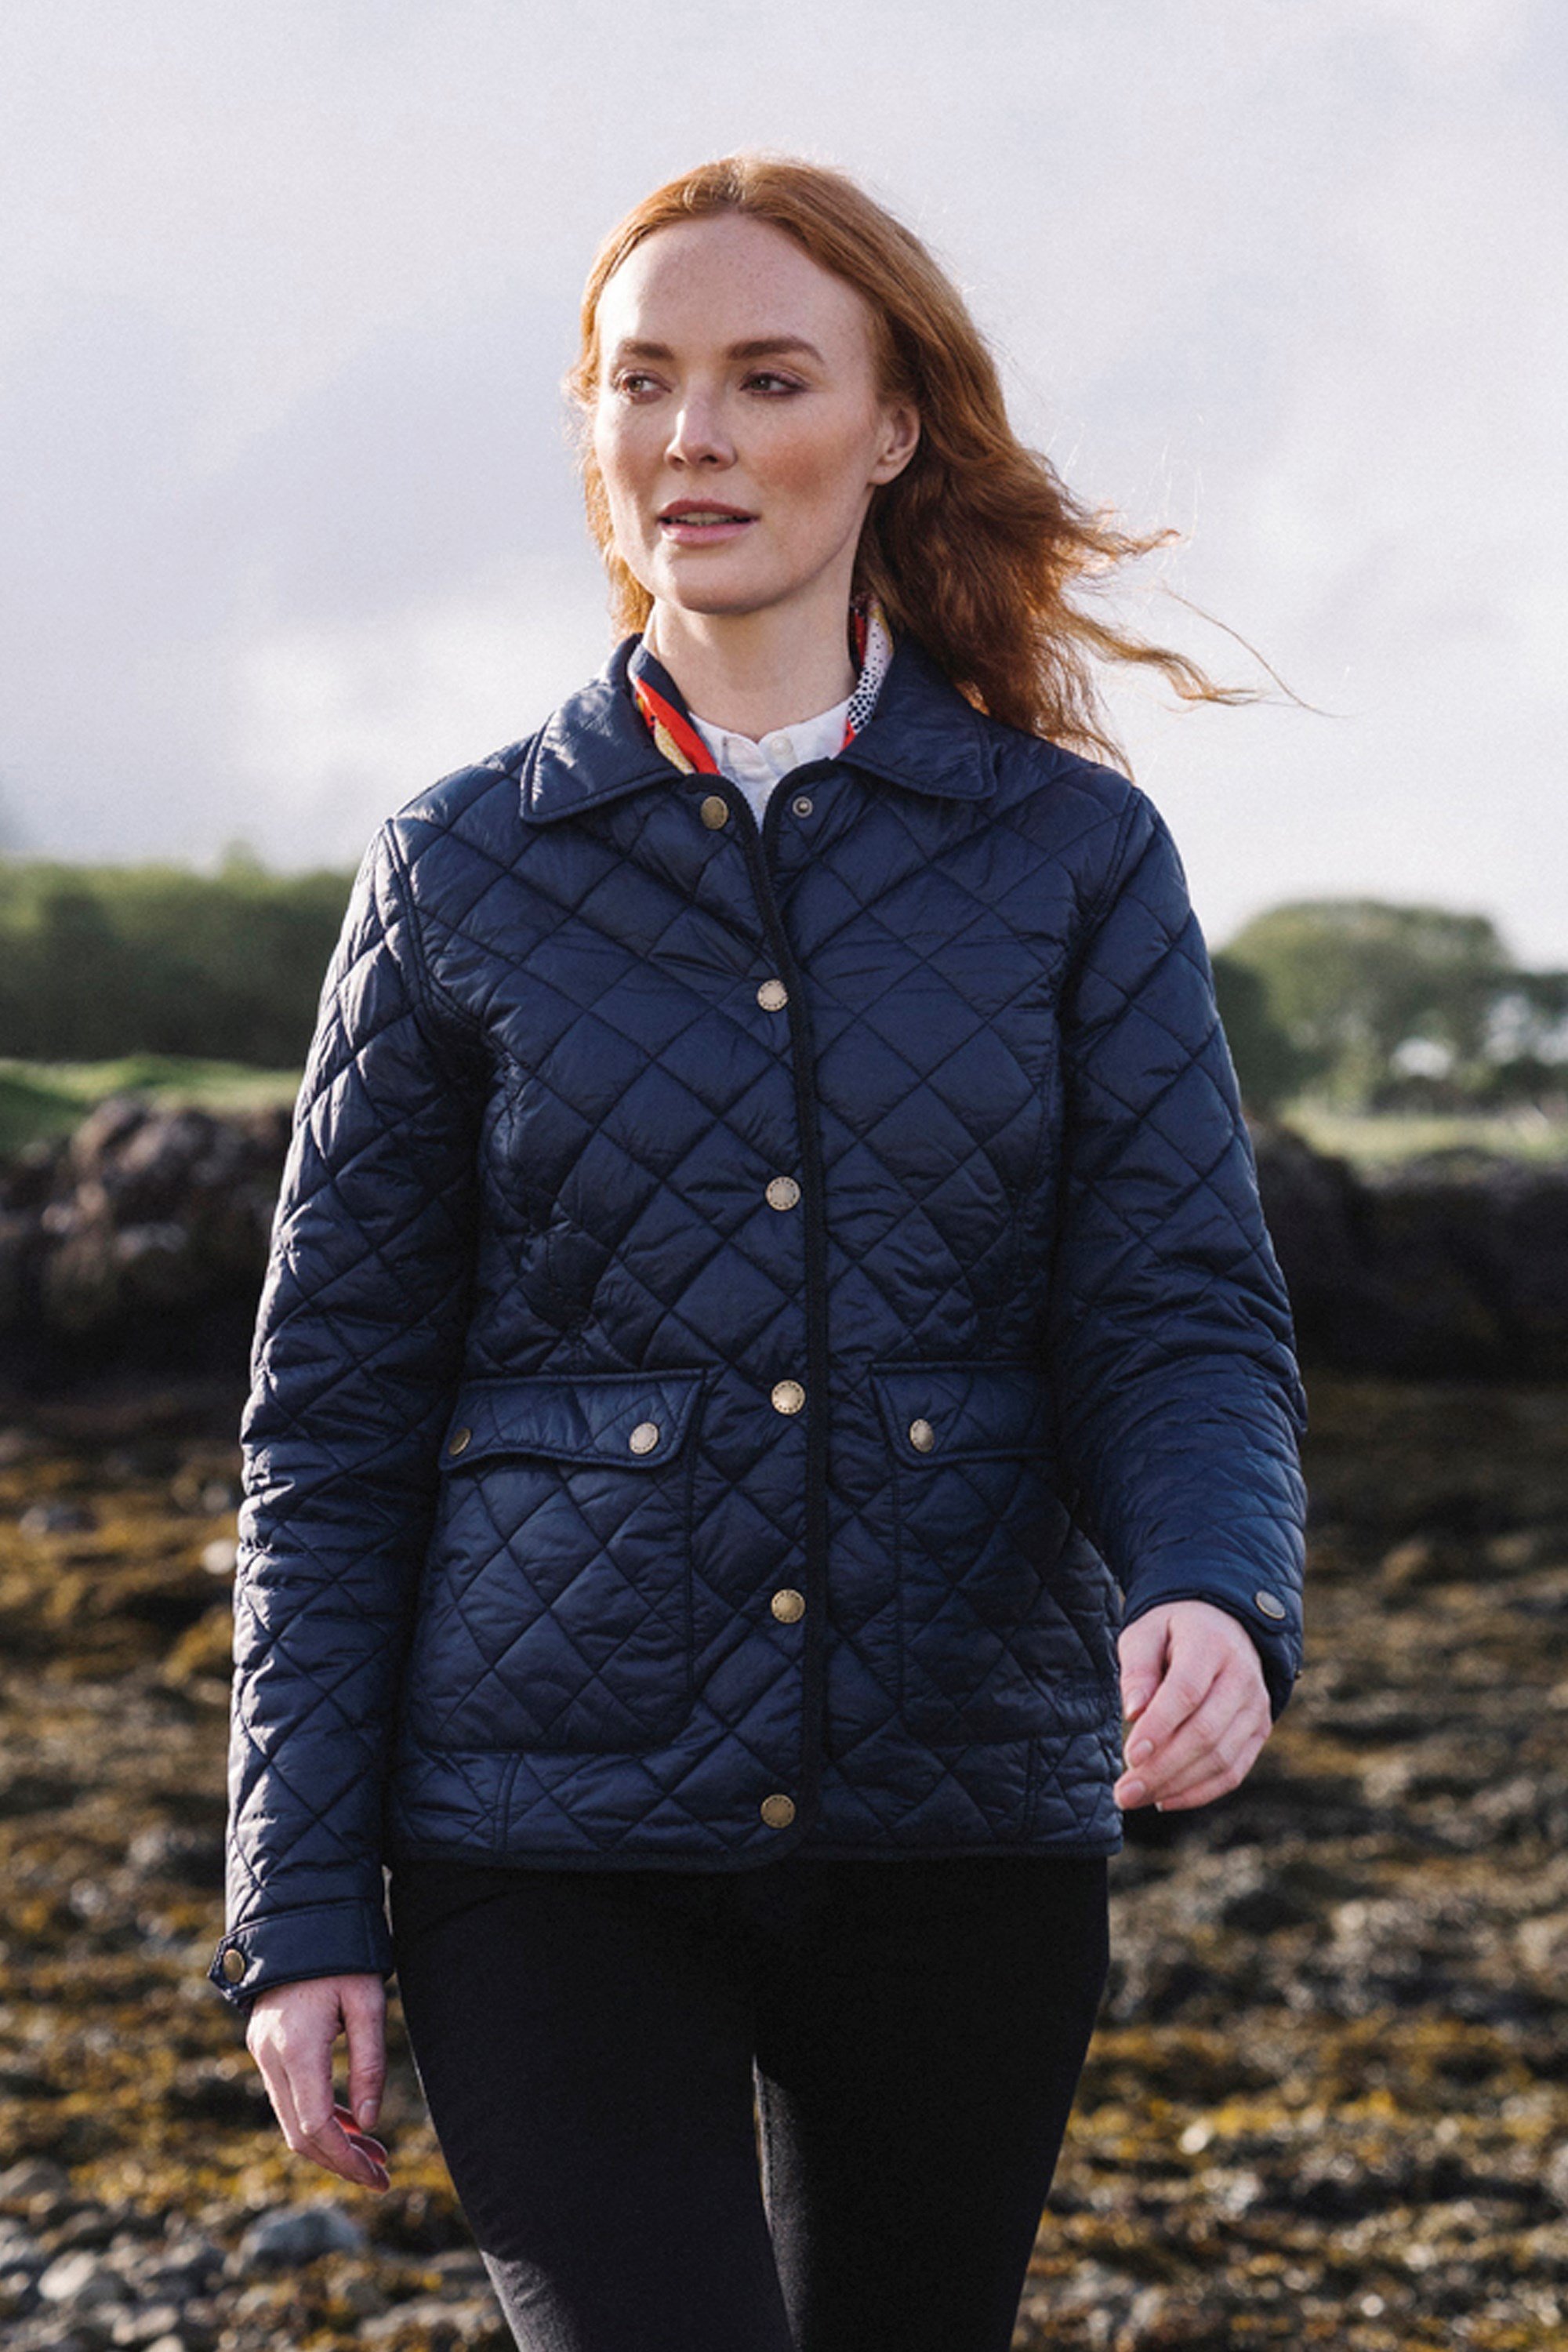 Tommy Hilfiger Ladies' Quilted Jacket | Costco